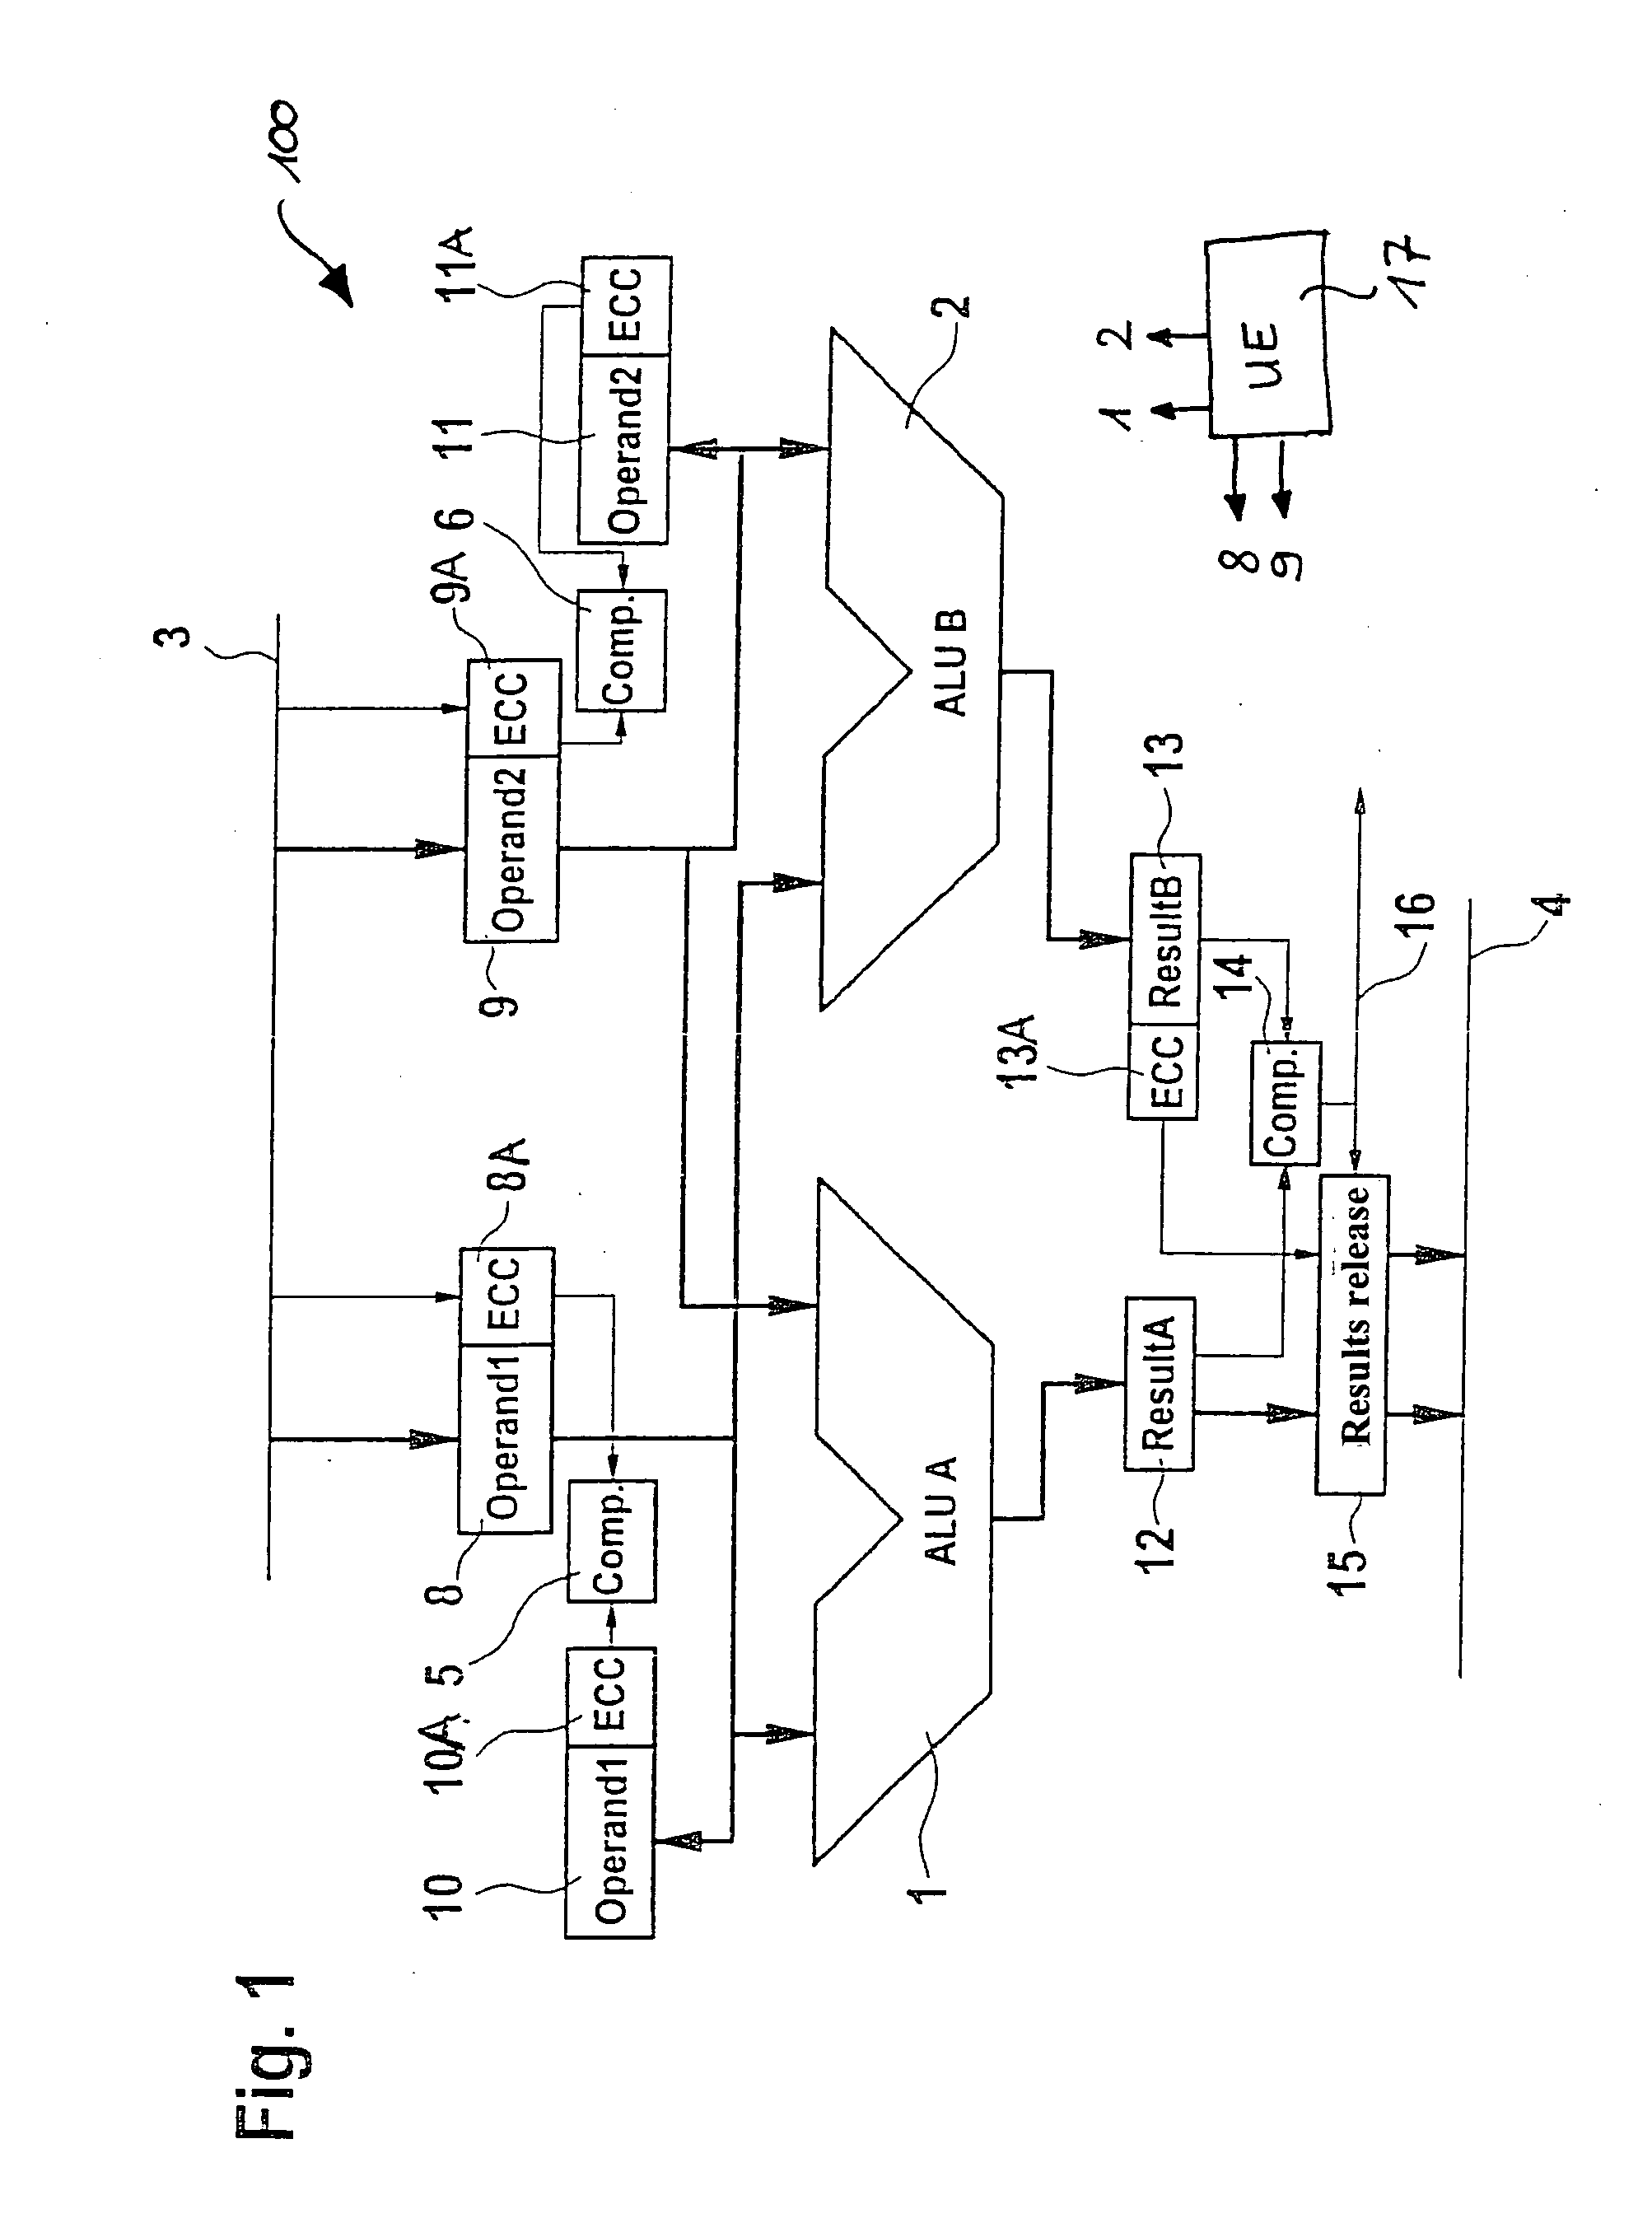 Method and Device for Switching Between at Least Two Operating Modes of a Processor Unit